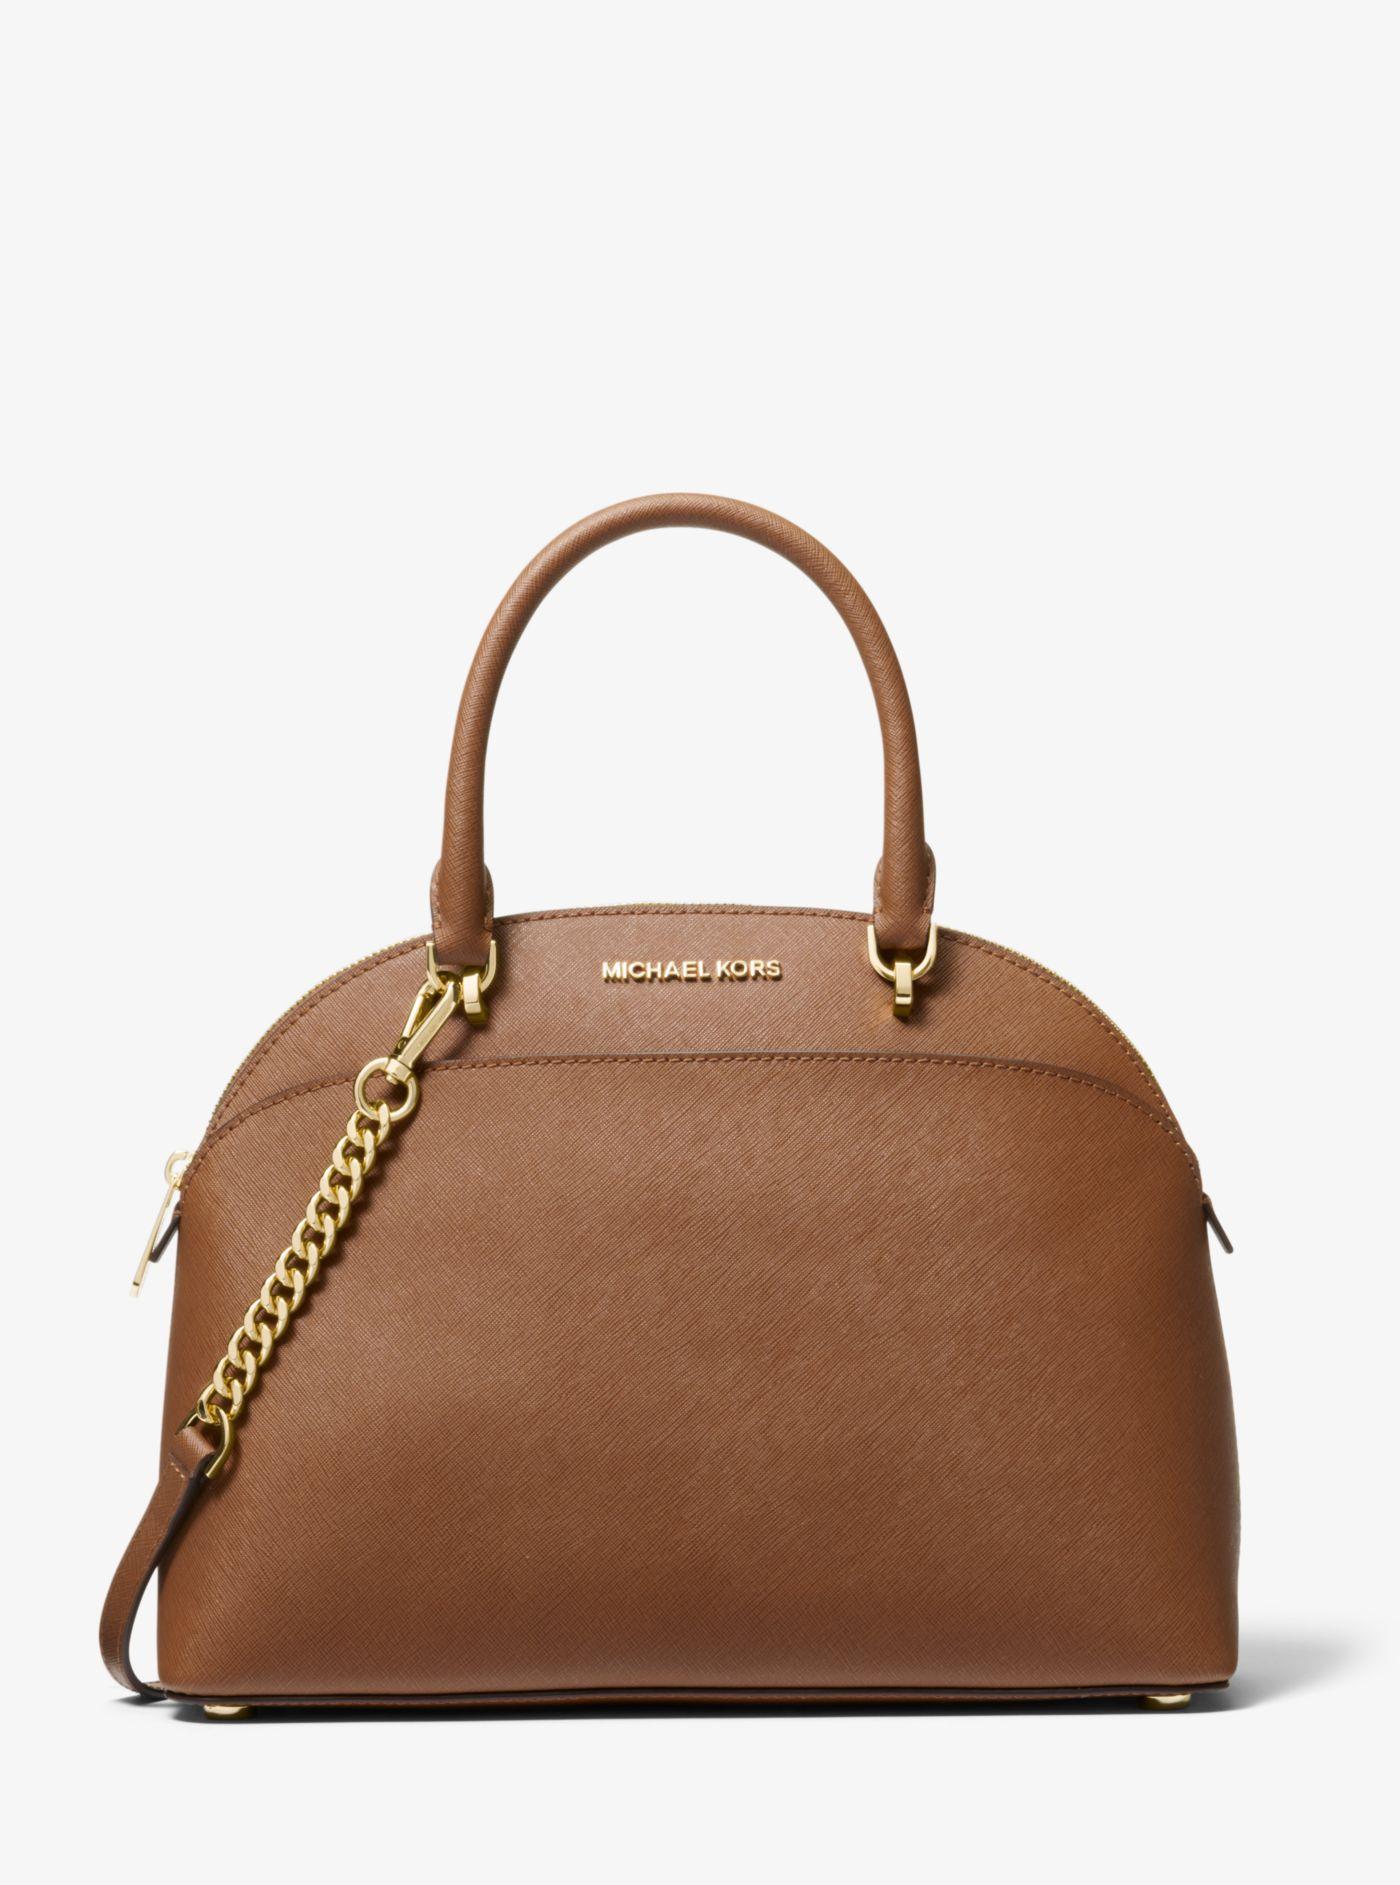 Michael Kors Emmy Large Saffiano Leather Dome Satchel in Brown | Lyst